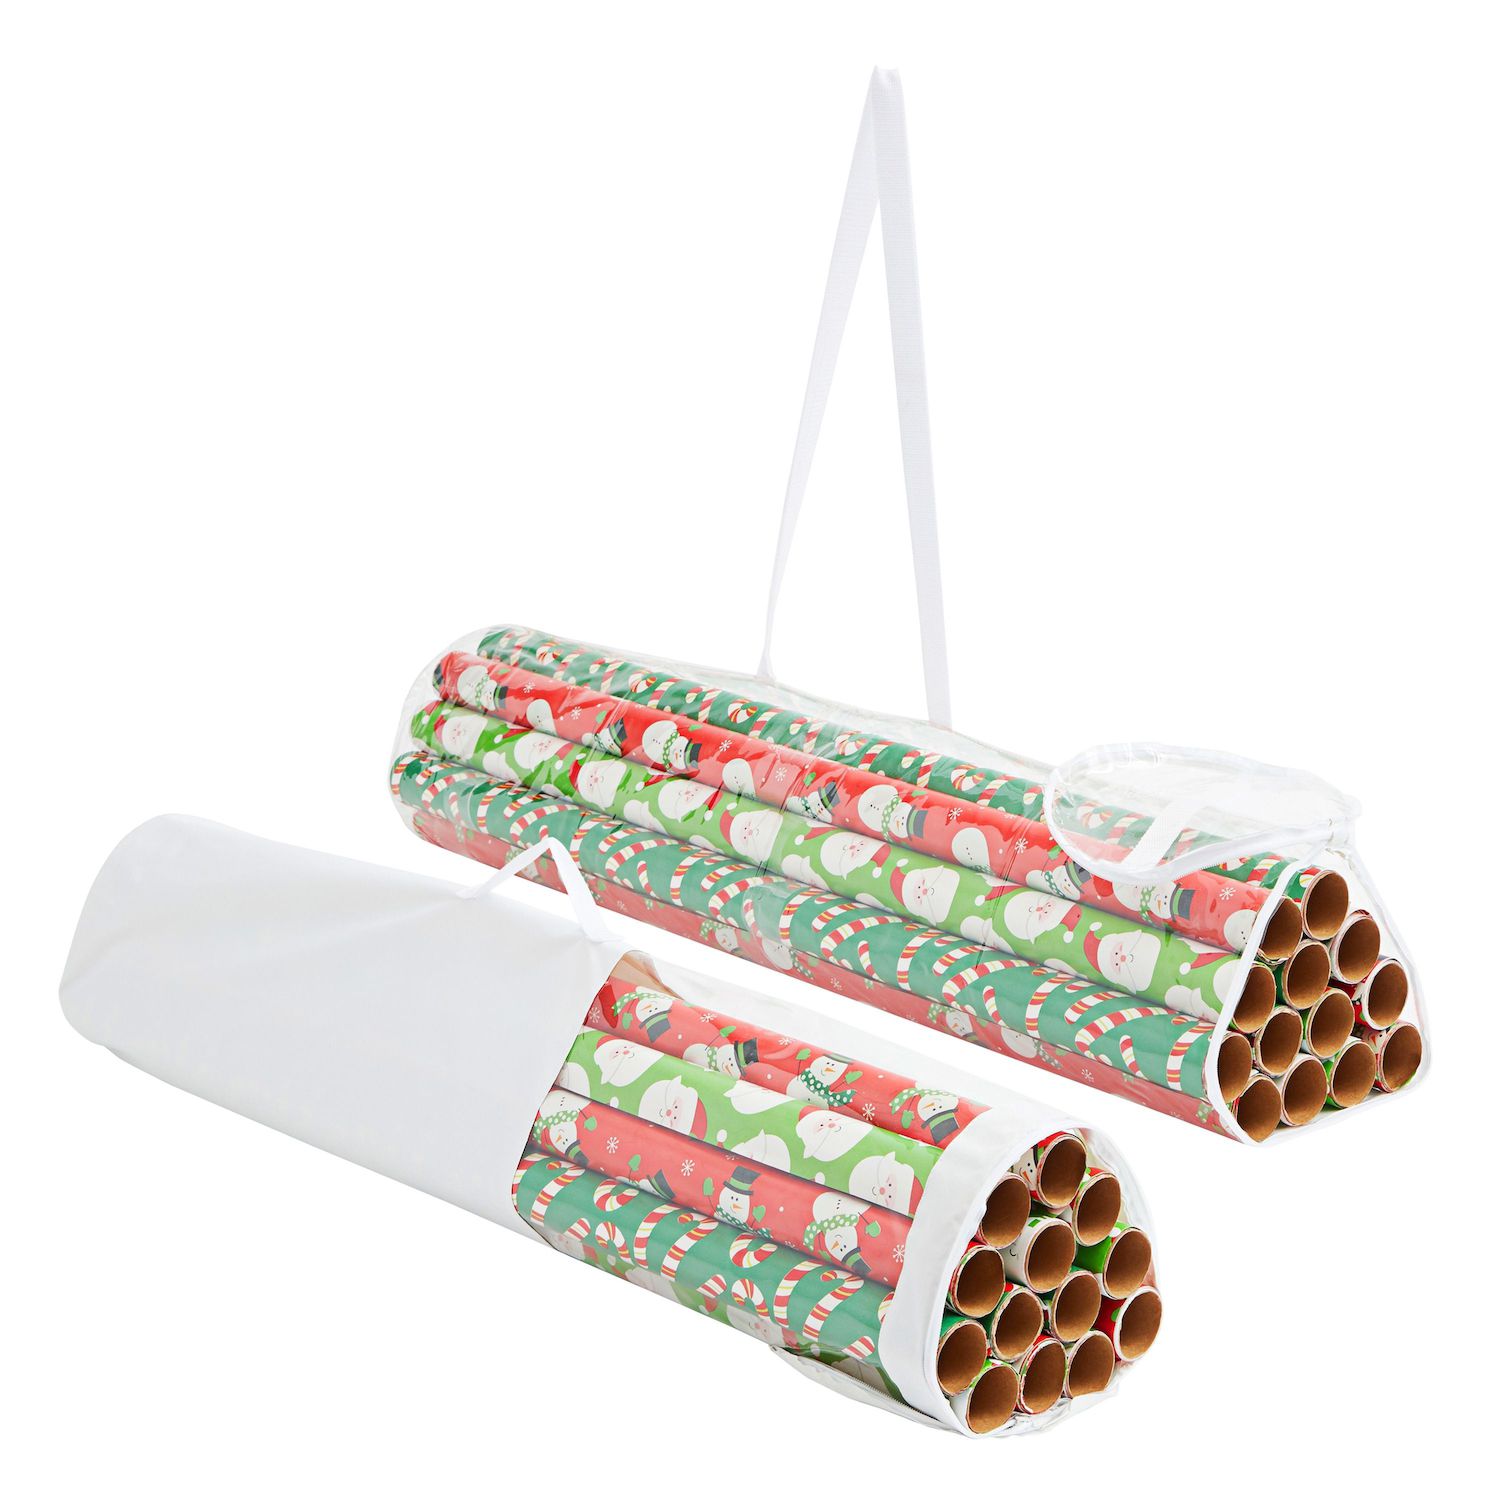 20 Roll Wrapping Paper Storage Bags, 2 Pack